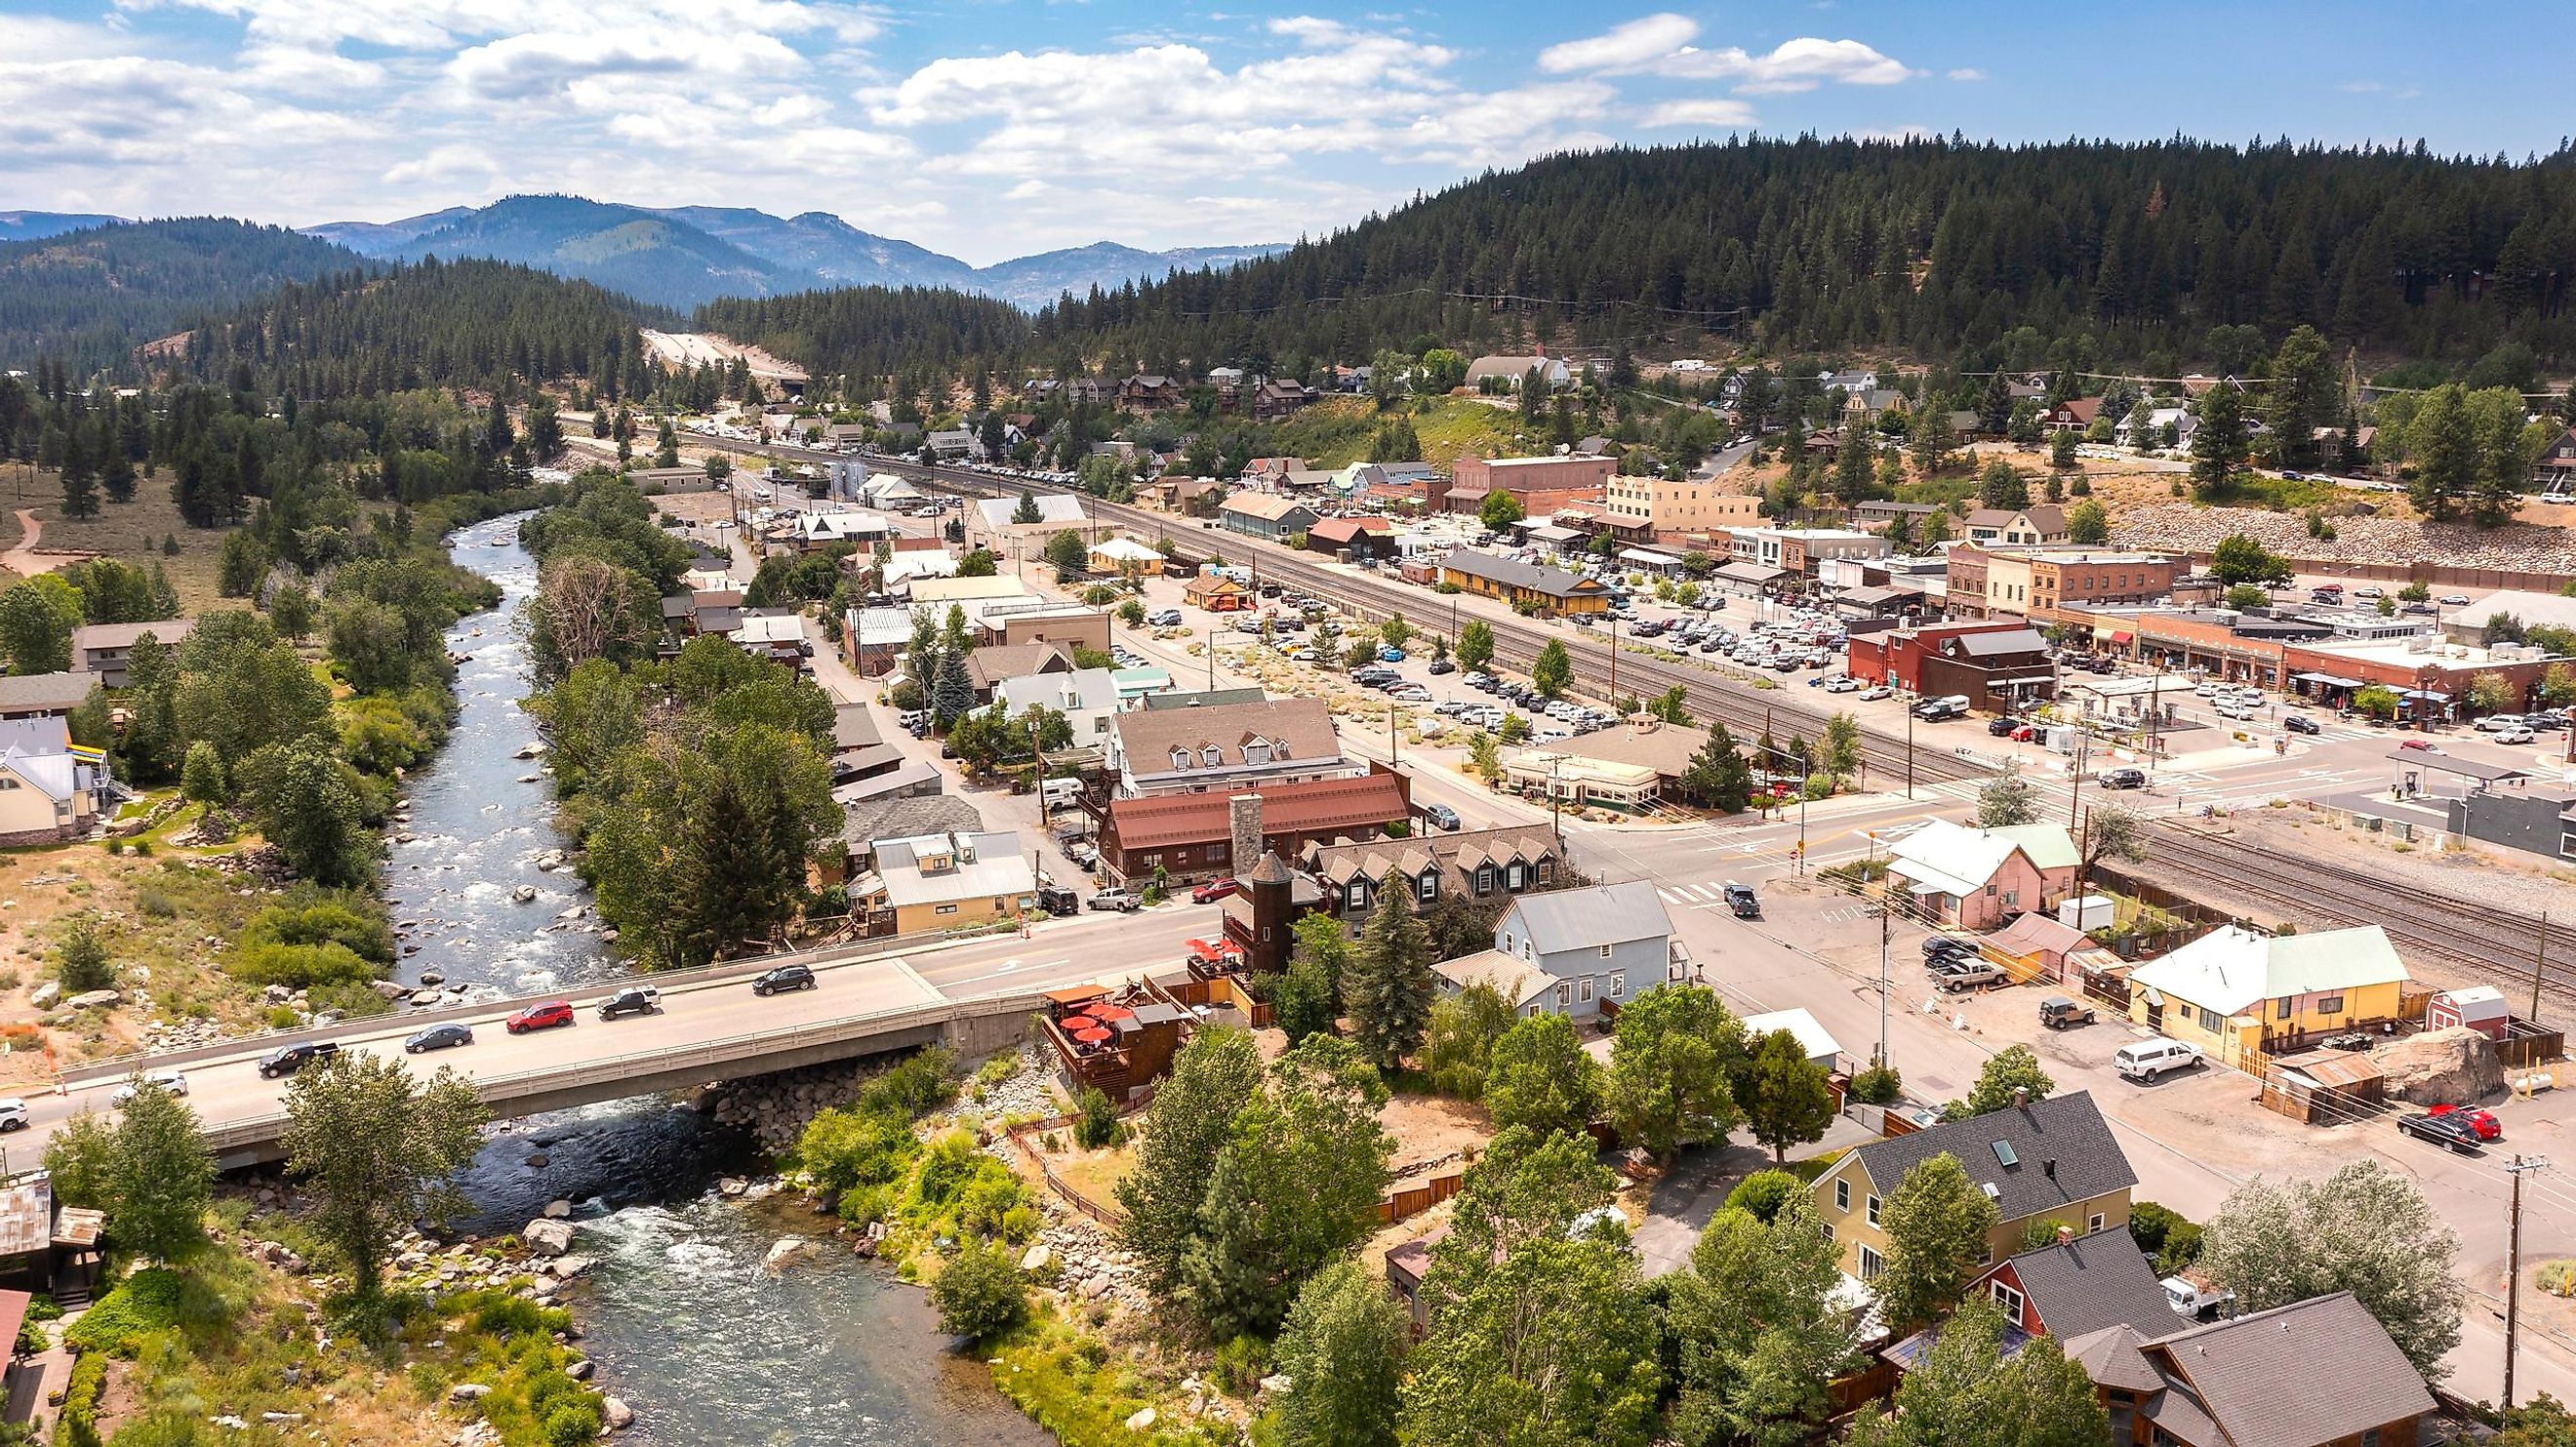 7 Small Towns In California's Sierra Nevada To Visit For A Weekend ...